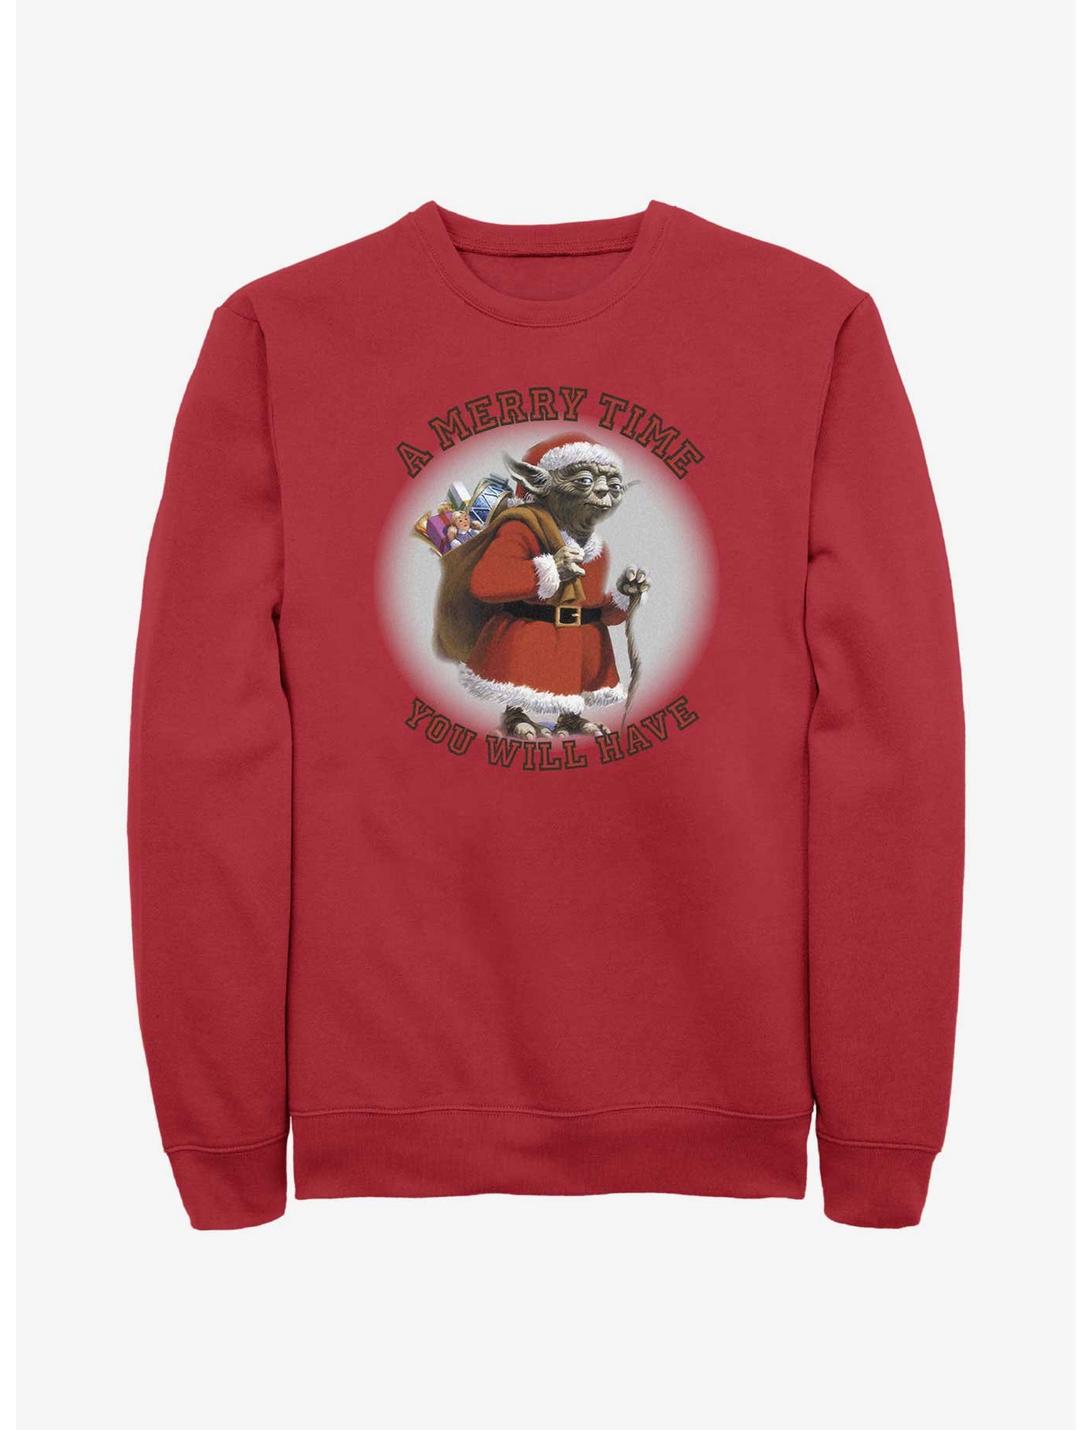 Star Wars Yoda Merry Time You Will Have Sweatshirt, RED, hi-res